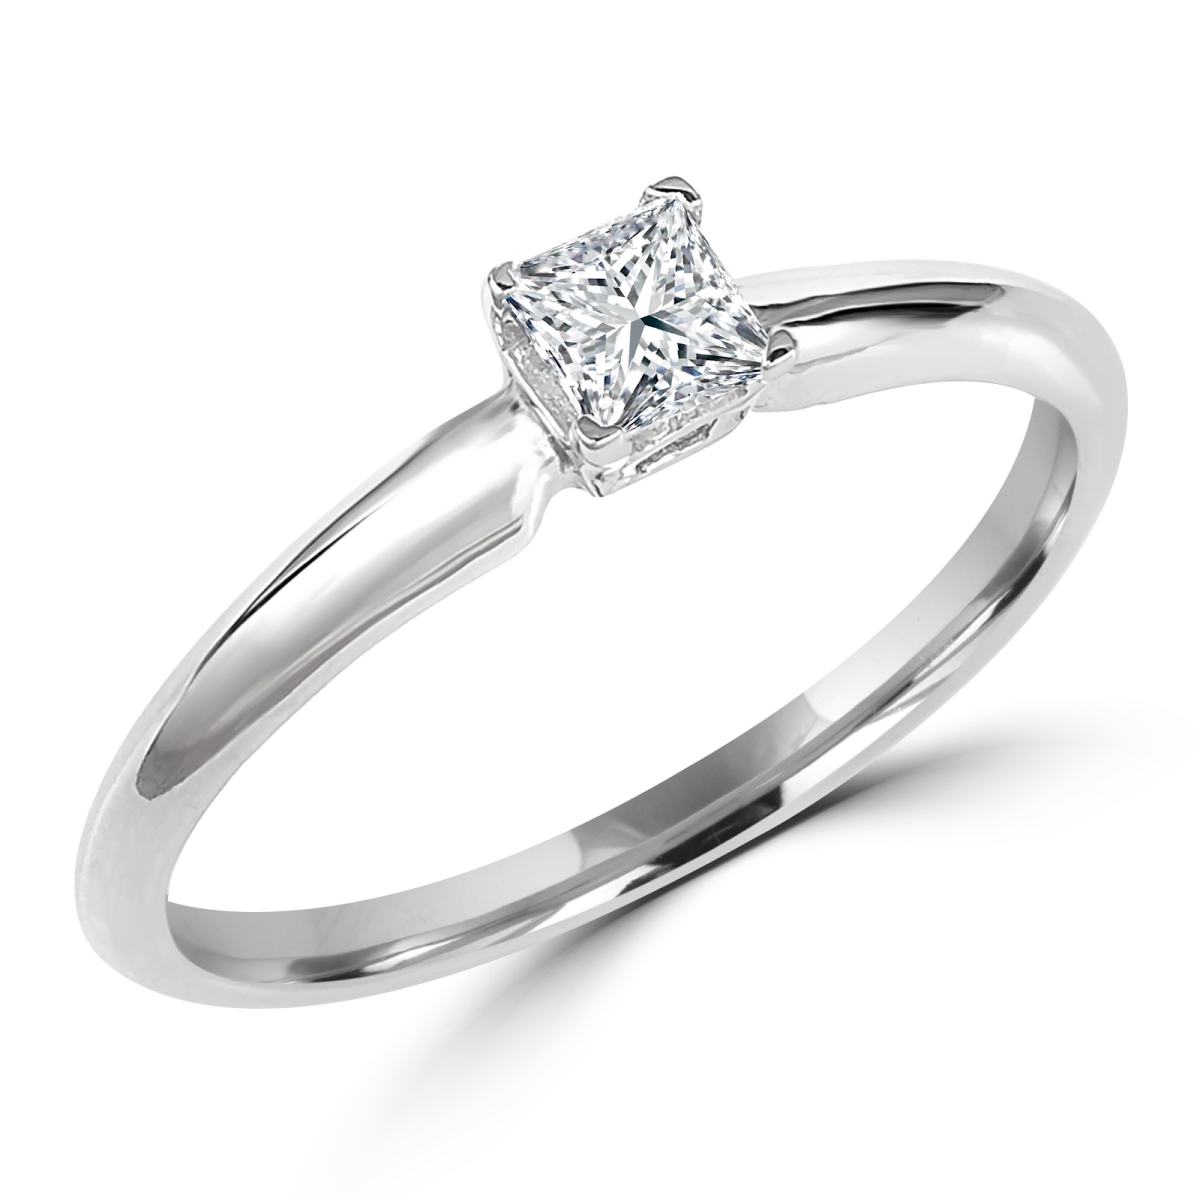 Picture of Majesty Diamonds MD170184-8.25 0.5 CT Princess Diamond Solitaire Engagement Ring in 10K White Gold - 8.25